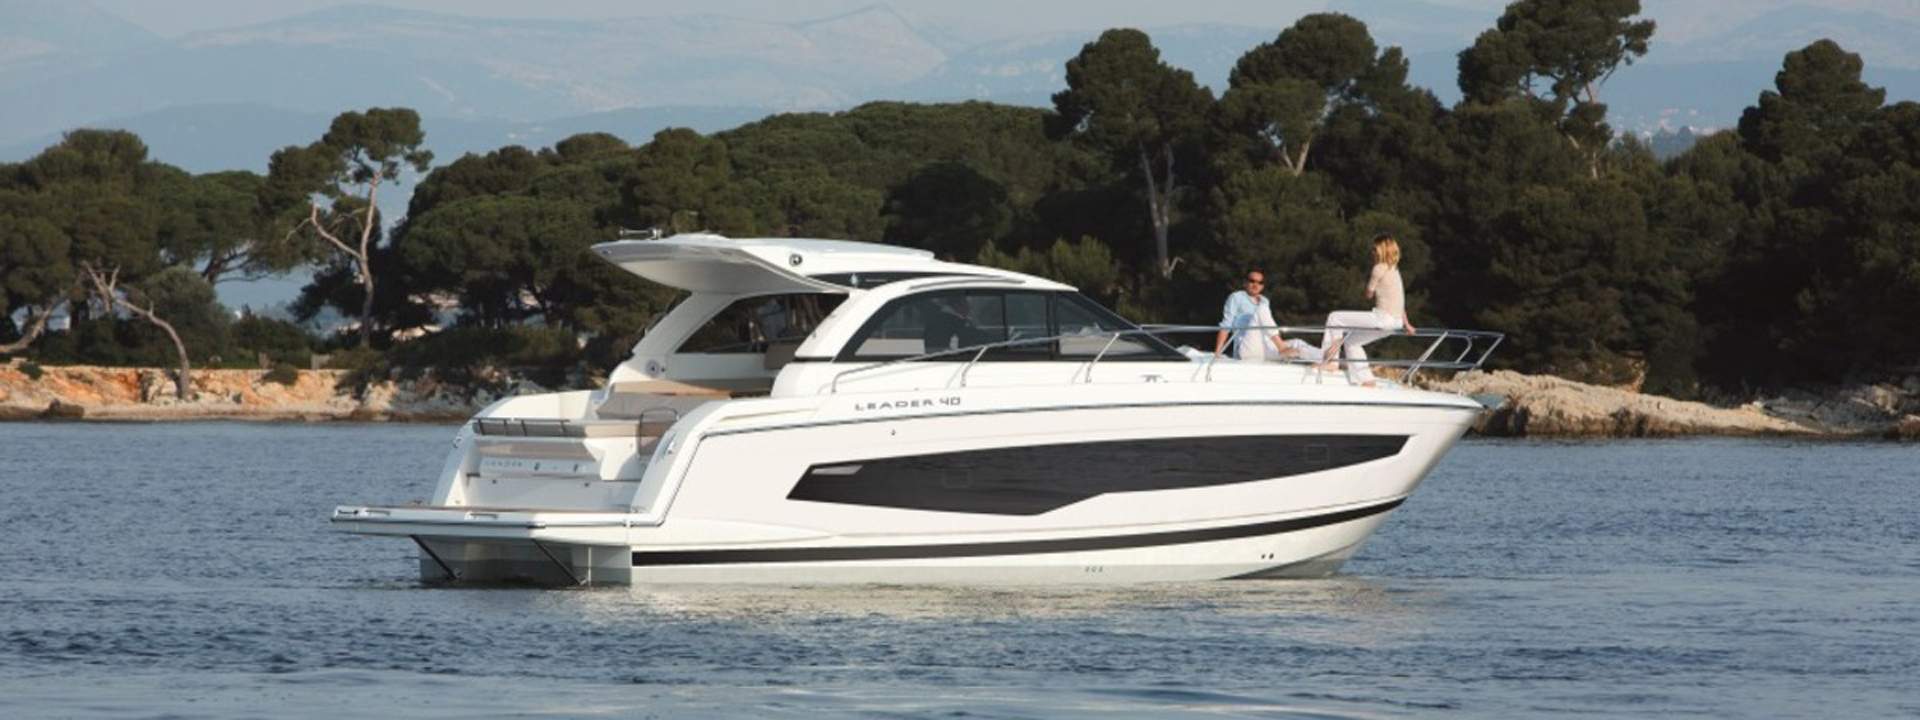 Barco a motor Leader 40